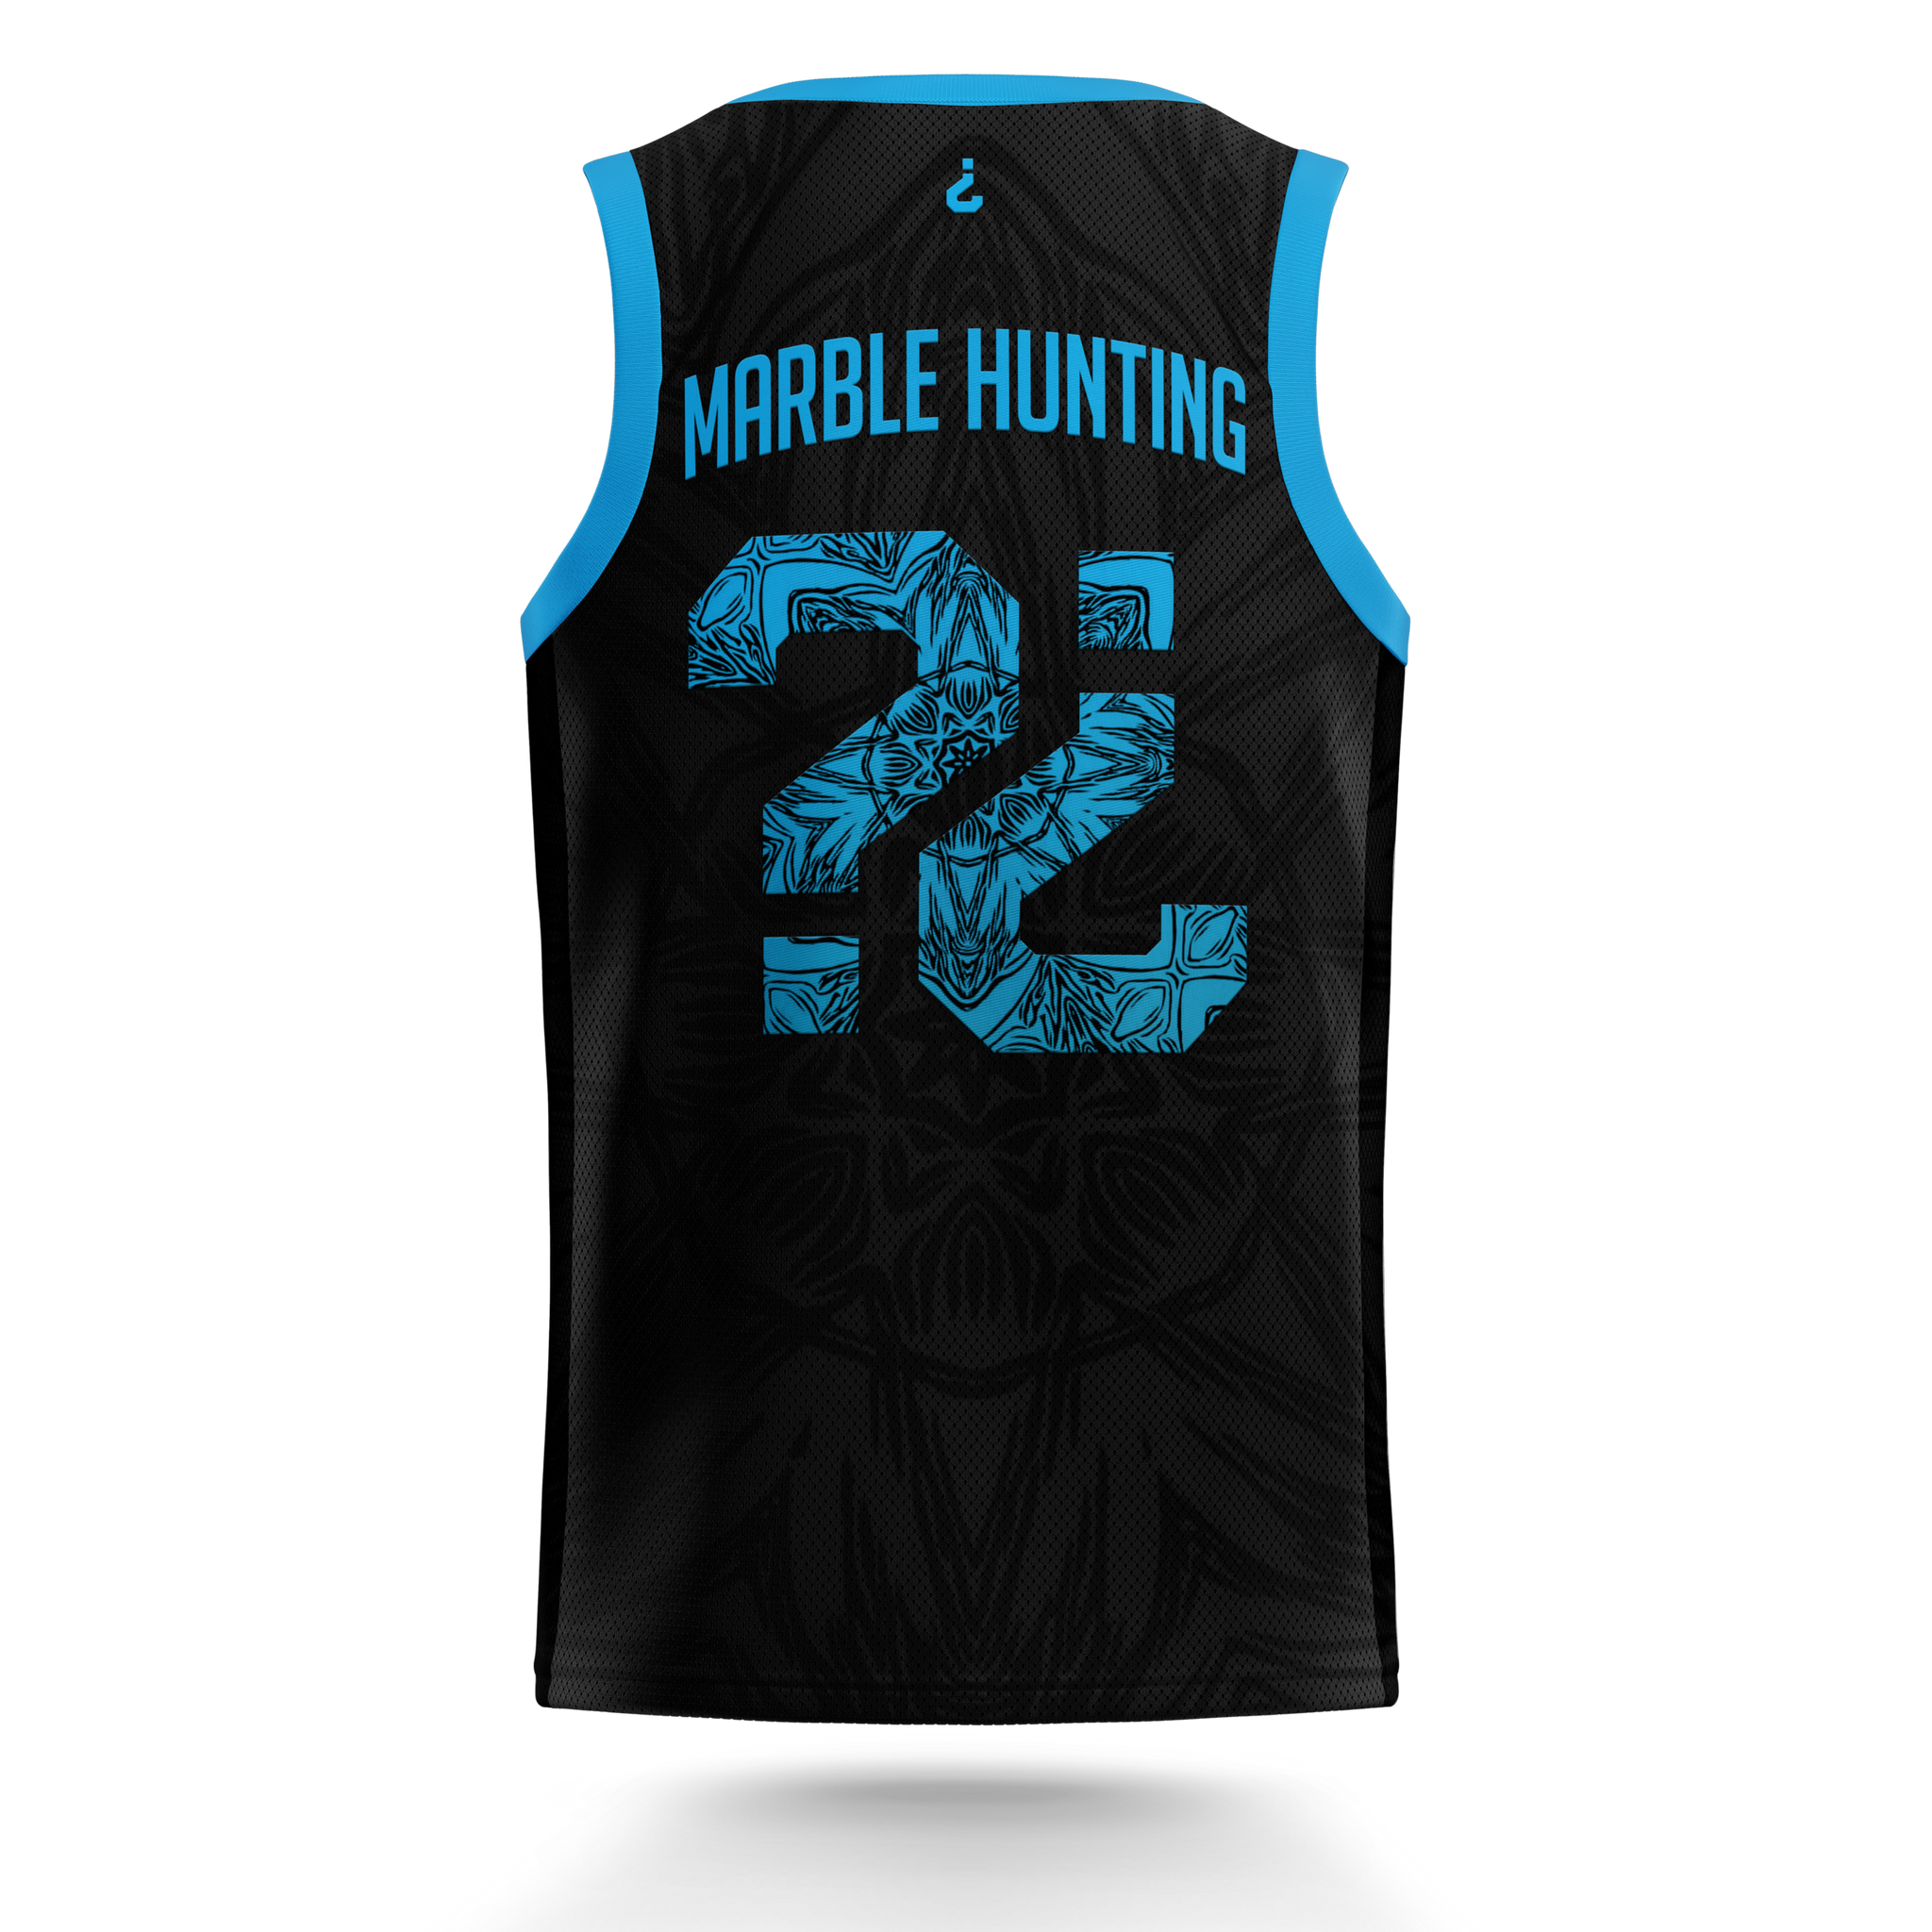 MARBLE HUNTING BASKETBALL JERSEY